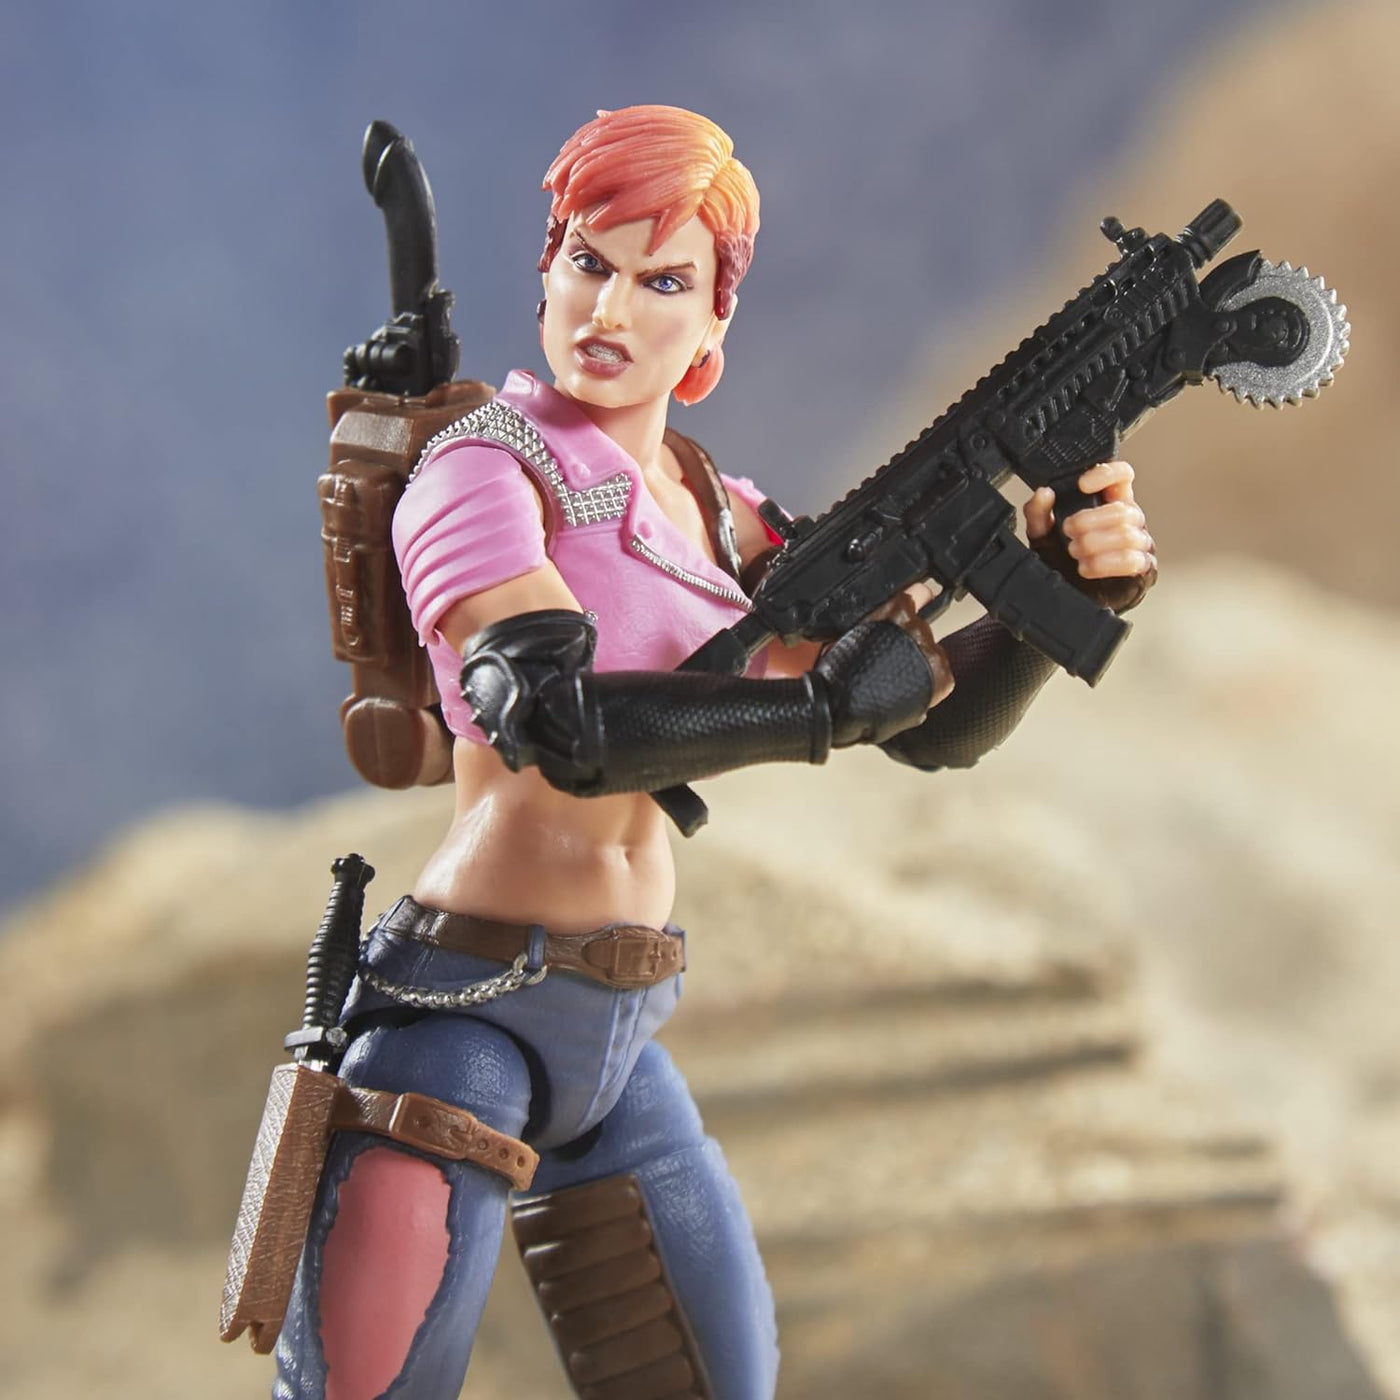 Zarana Action Figure 48 Collectible Premium Toys with Multiple Accessories 6-Inch-Scale